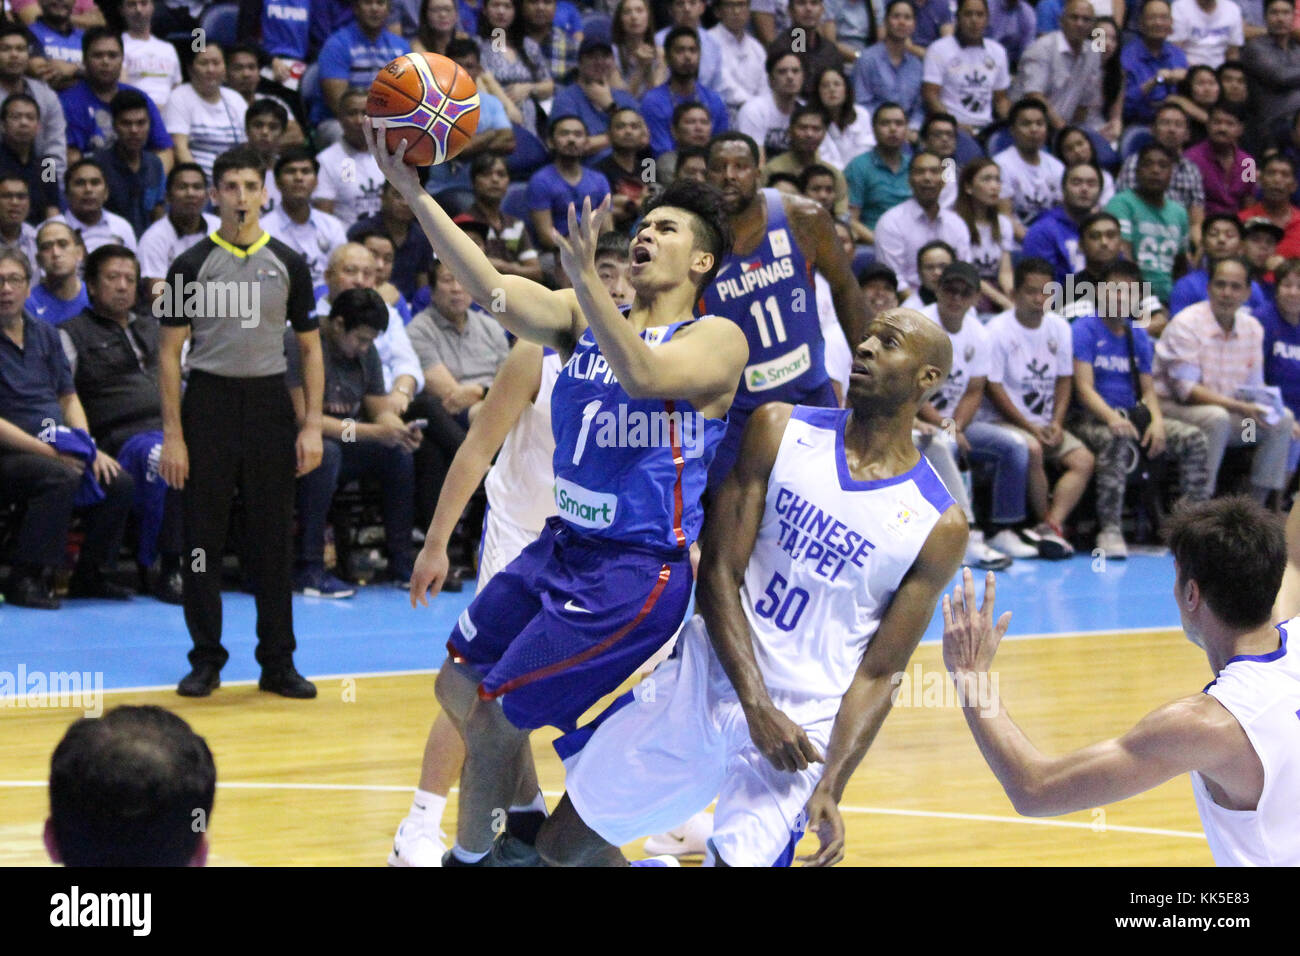 Quezon City, Philippines. 27th Nov, 2017. Kiefer Isaac Ravena (1) of the Philippines drives past two players from soars past Quincy Davis III (50) of Chinese Taipei to convert an uncontested lay-up during their FIBA World Cup Qualifying Match. Gilas Pilipinas defeated the visiting Chinese Taipei team 90-83 to complete a sweep of their first two assignments in the FIBA 2019 World Cup qualifiers. Credit: Dennis Jerome Acosta/ Pacific Press/Alamy Live News Stock Photo